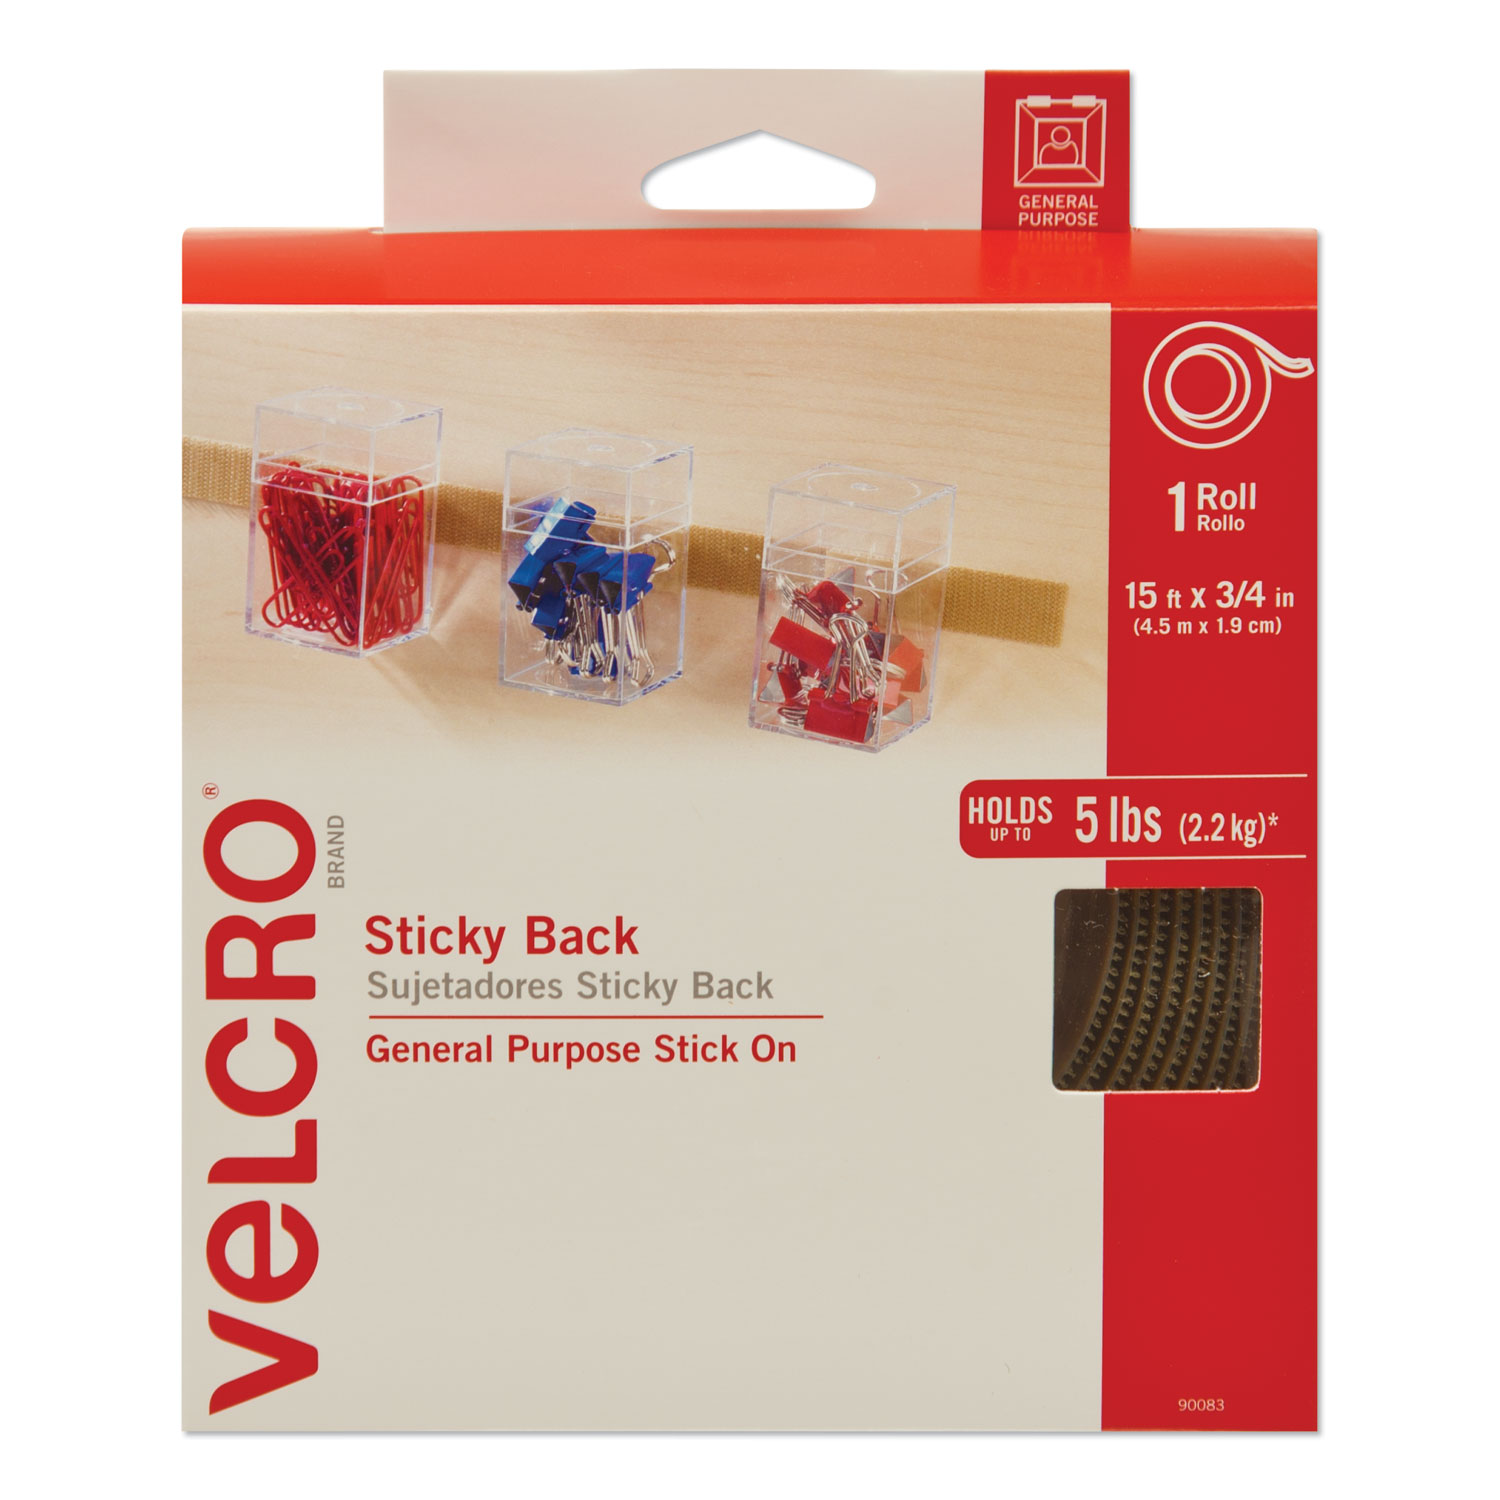  VELCRO Brand 90083 Sticky-Back Fasteners with Dispenser, Removable Adhesive, 0.75 x 15 ft, Beige (VEK90083) 